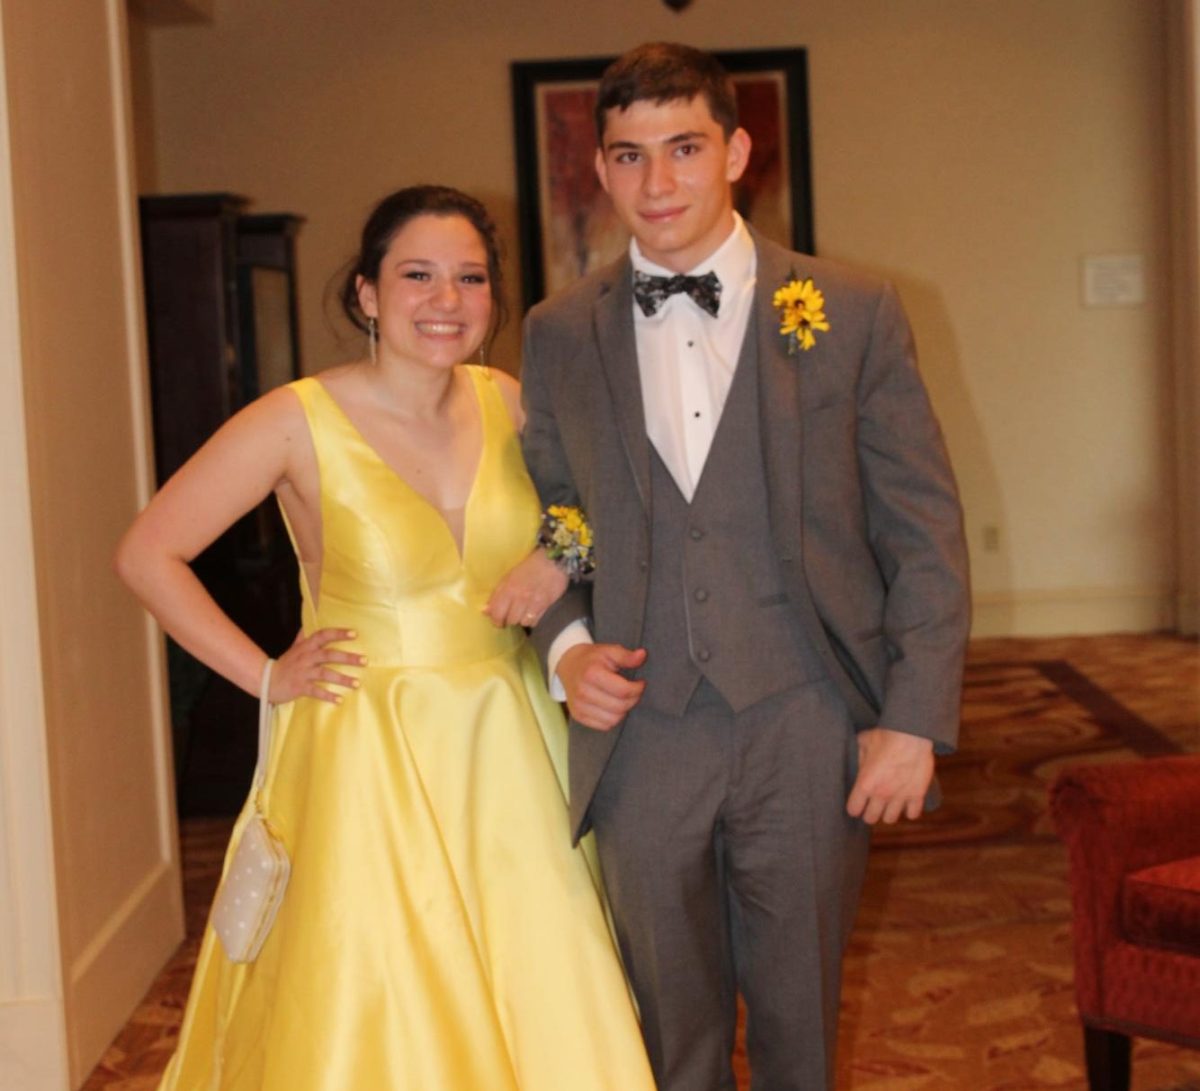 Going to prom with friends or your significant other is a big milestone for your relationship. 